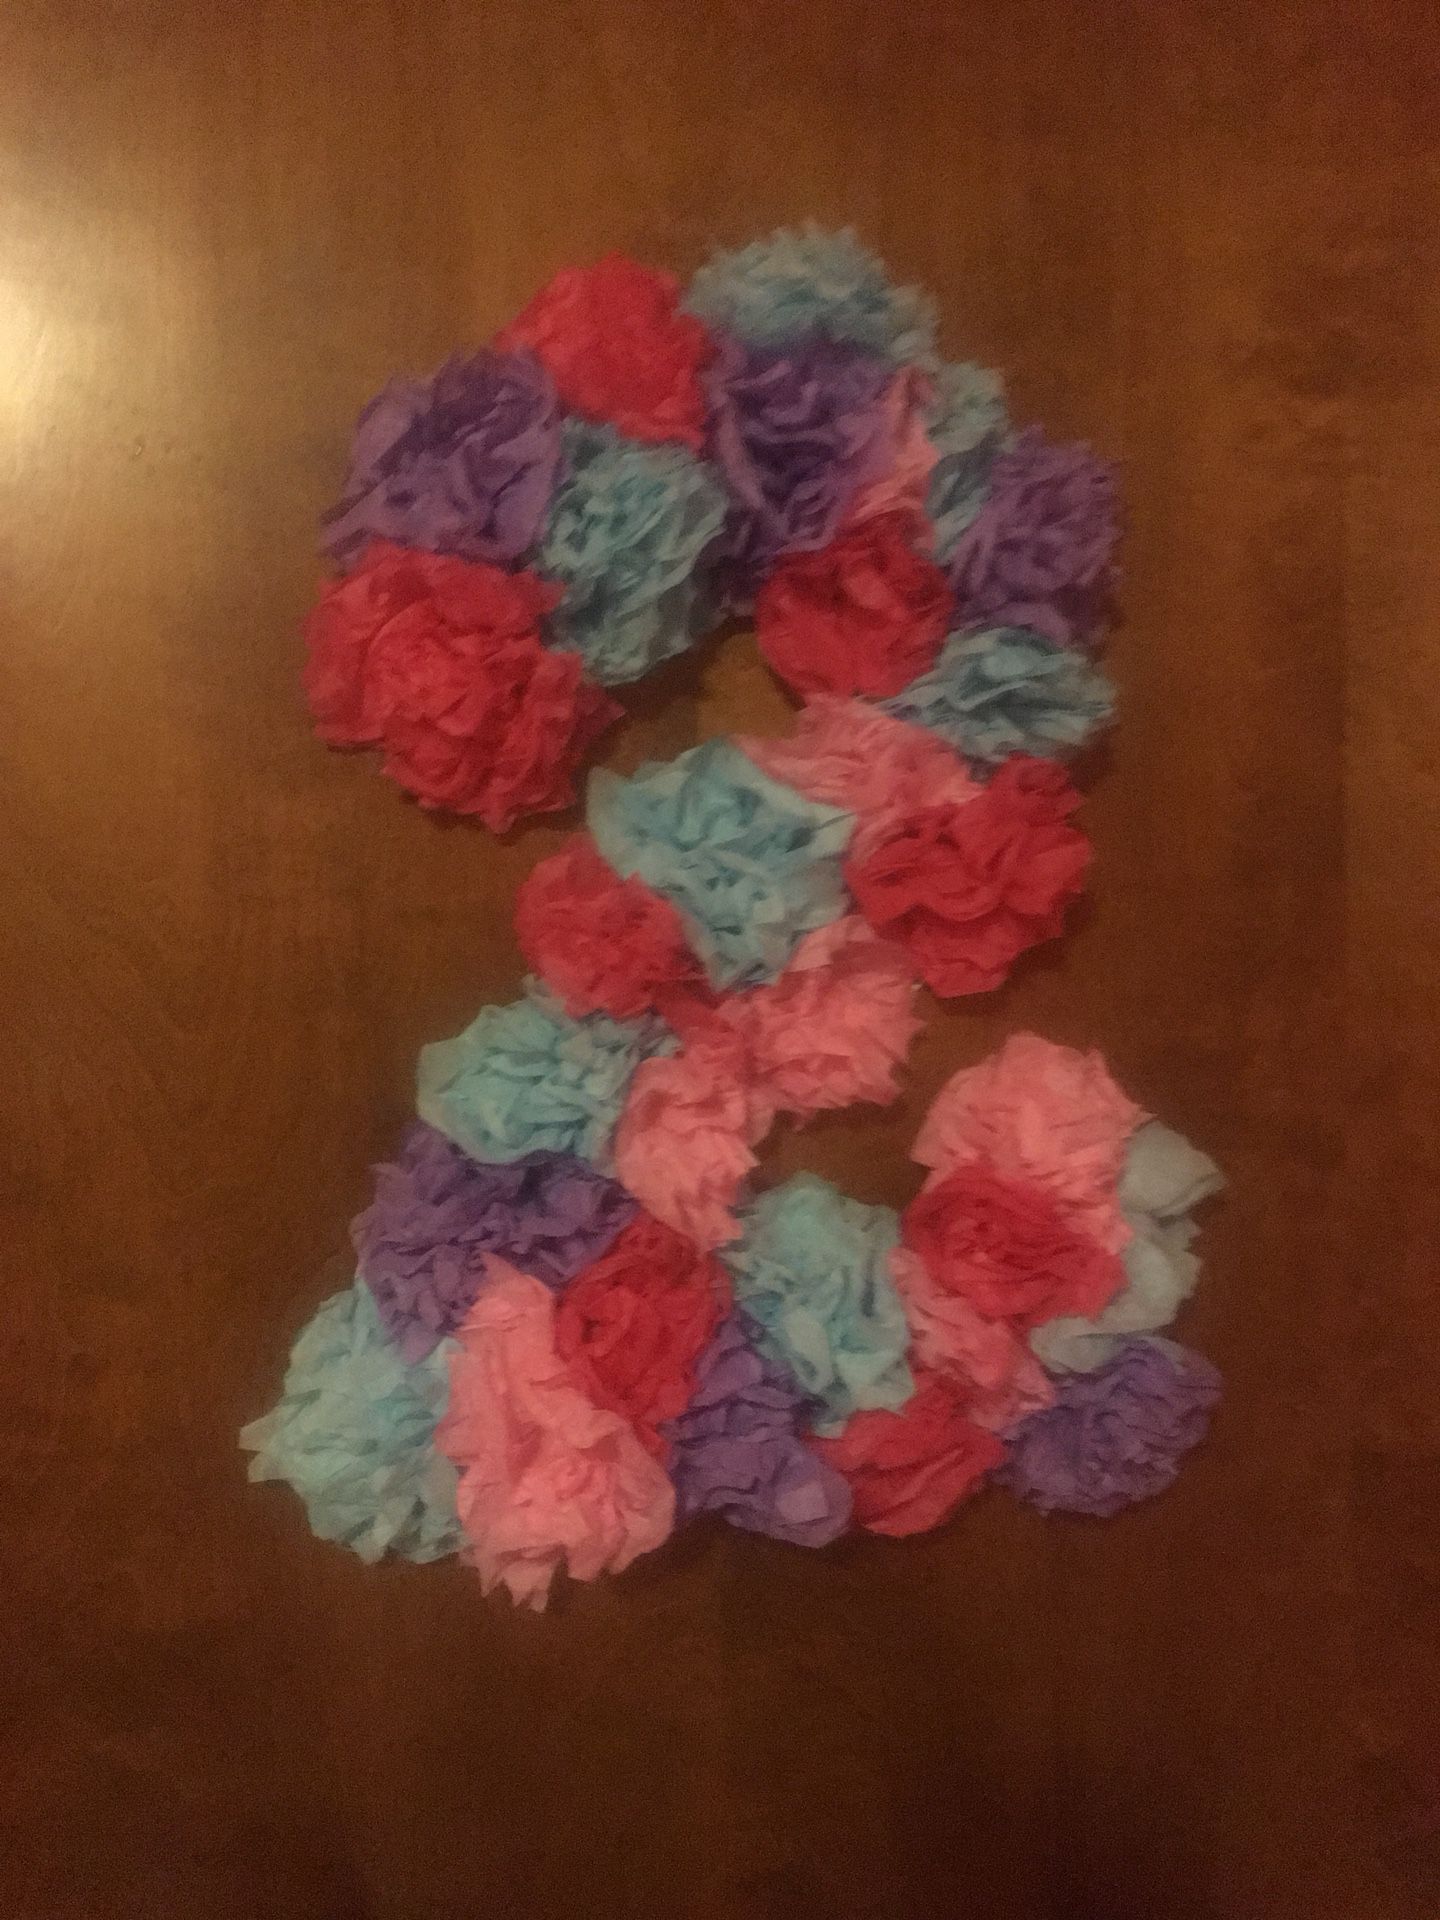 Tissue paper flower 2 party prop or room decor